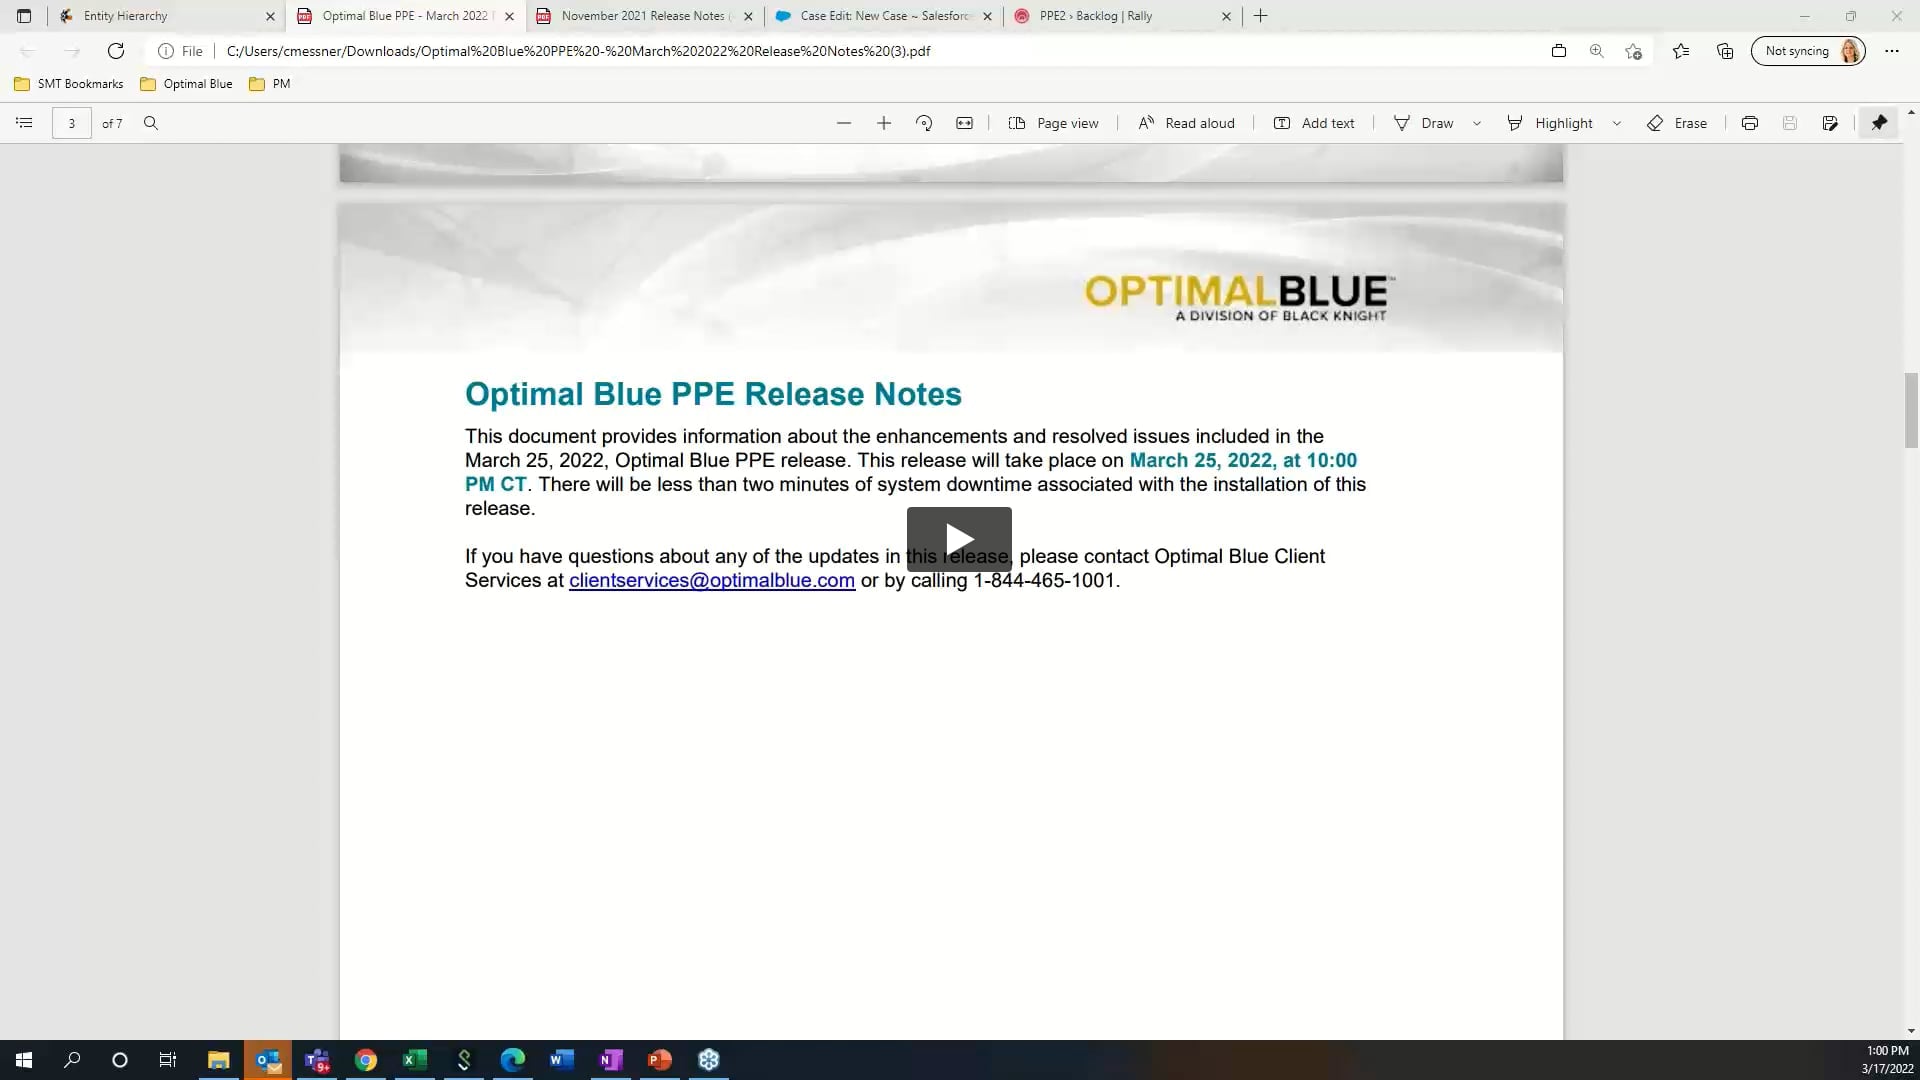 2022-03-17 1300 March 2022 Release Webcast - Optimal Blue PPE